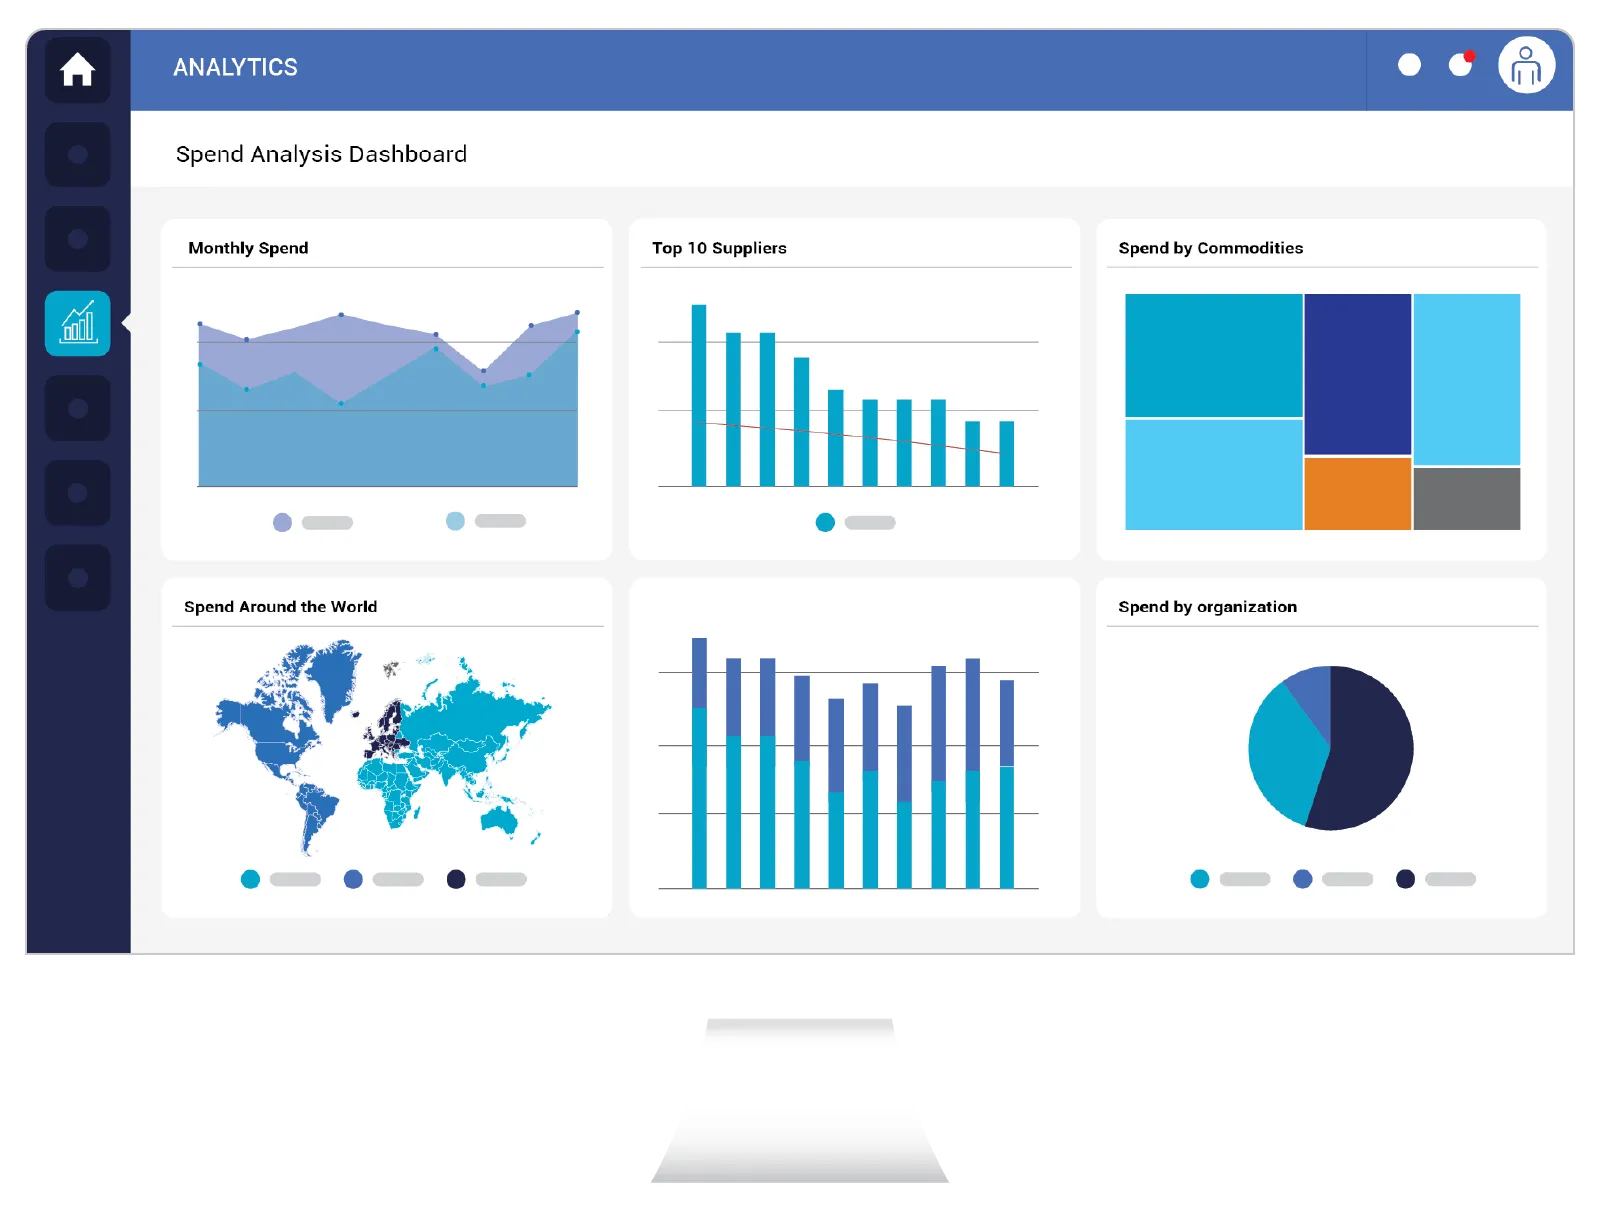 Spend Analysis: Uncover Opportunities with Complete Spend Transparency
- Analyze spend from all sources
- Powerful on-demand classification
- Spend classification visibility and transparency